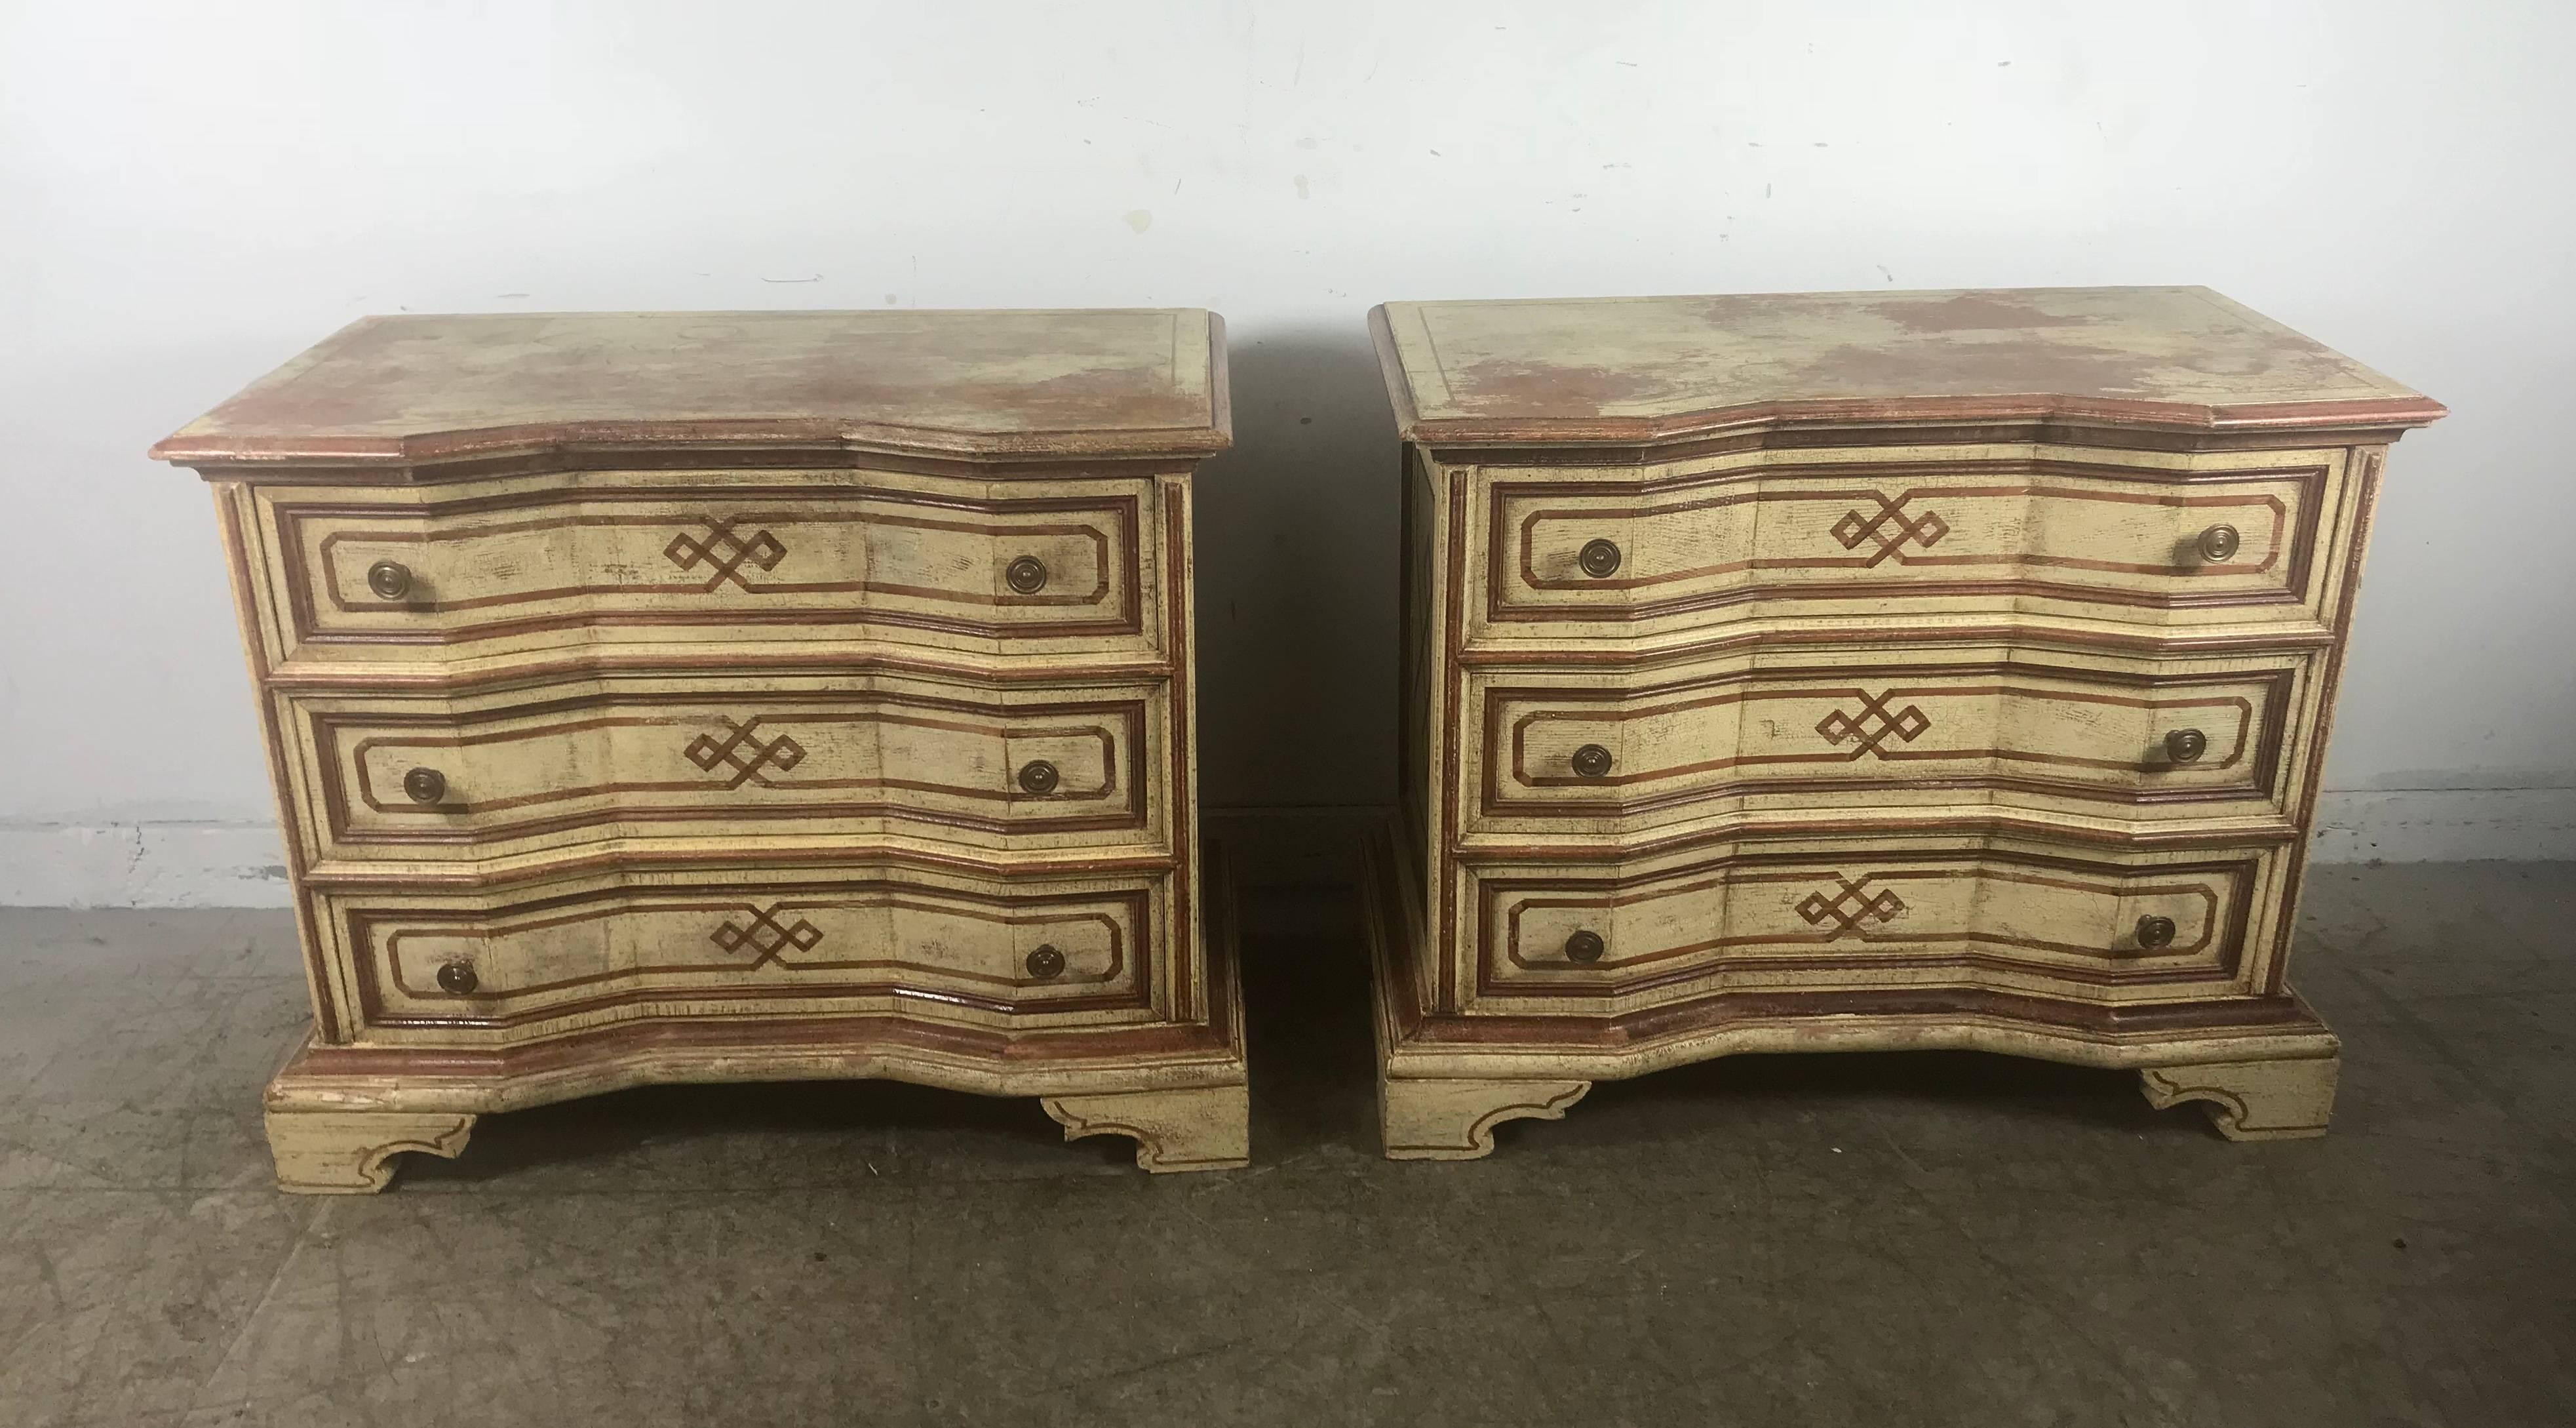 Pair of Italian Hollywood Regency painted three drawer stands or commodes, white washed , cerused and stenciled, striking design. Hand delivery avail to New York City or anywhere en route from Buffalo NY.